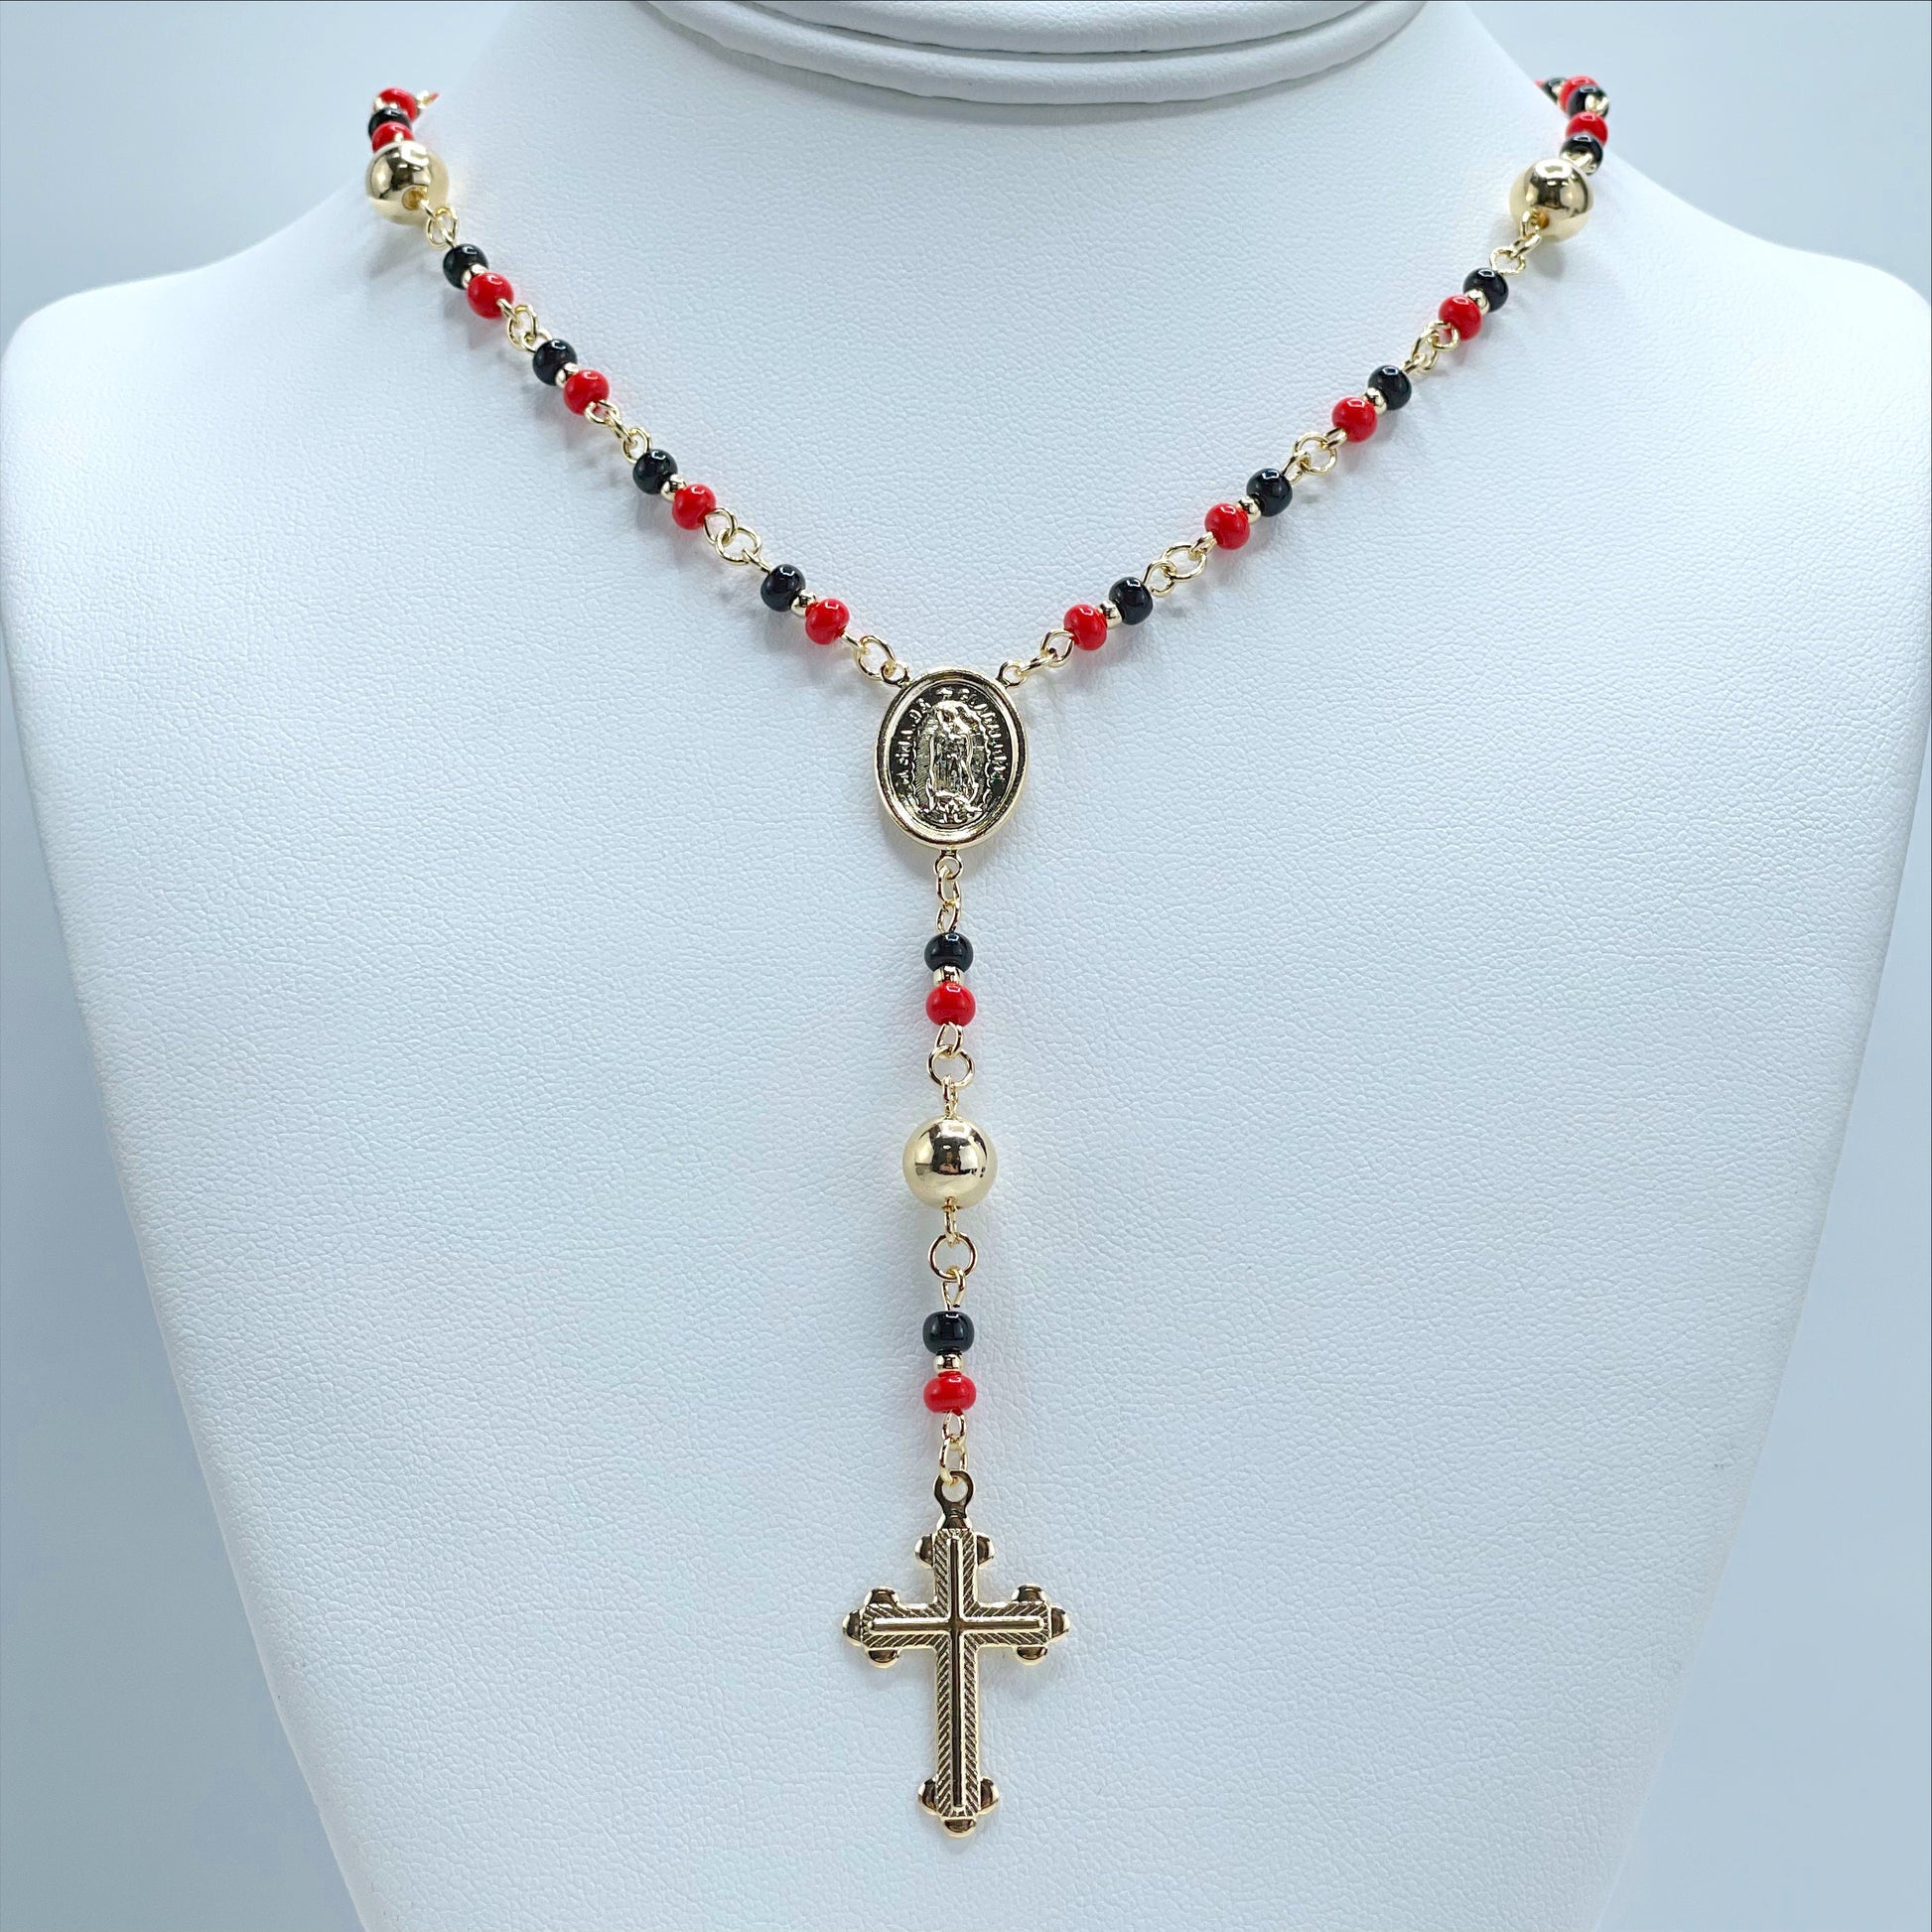 18k Gold Filled Black and Red Beads Simulated Azabache Guadalupe Virgin Beaded Rosary Necklace  Religious Wholesale Jewelry